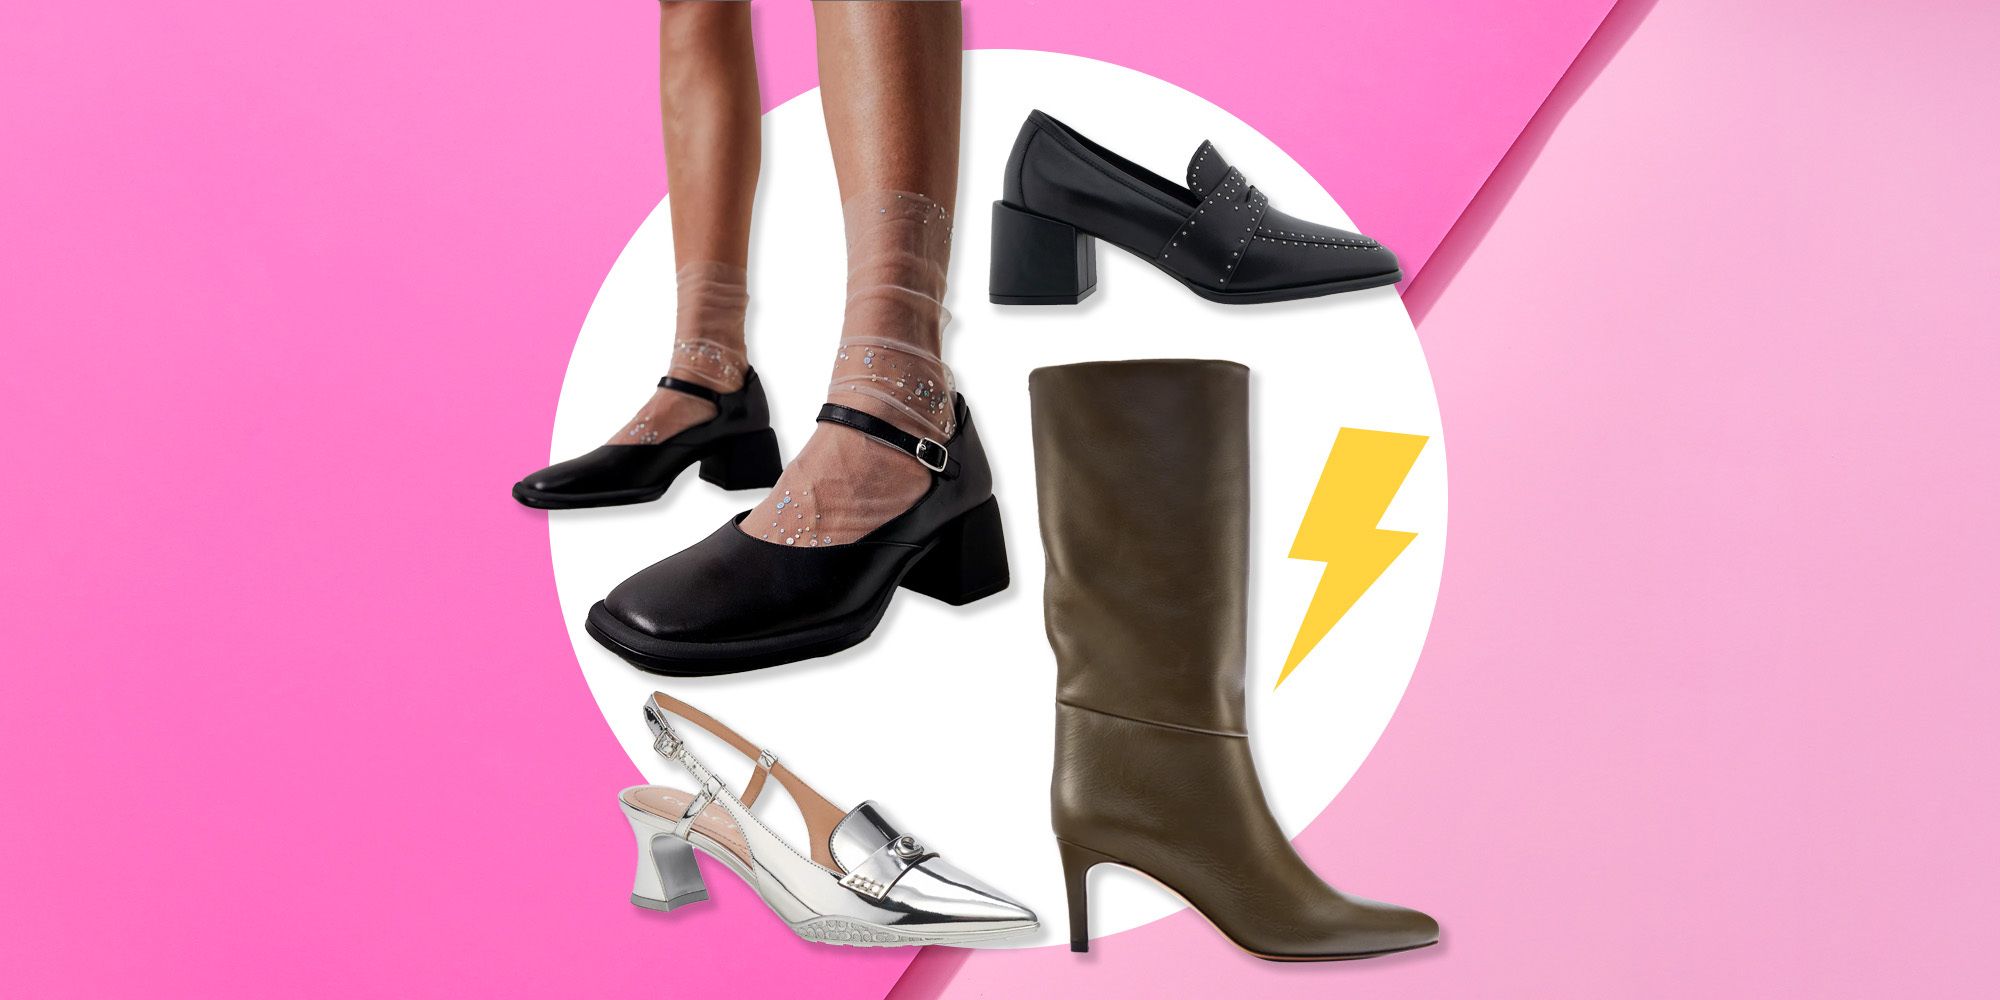 FODs Online Store - Tips to learn how to buy comfortable heels 👠 that  won't hurt your feet all day ☝🏼 ______ . 👠- Don't get a heel with a sole  that